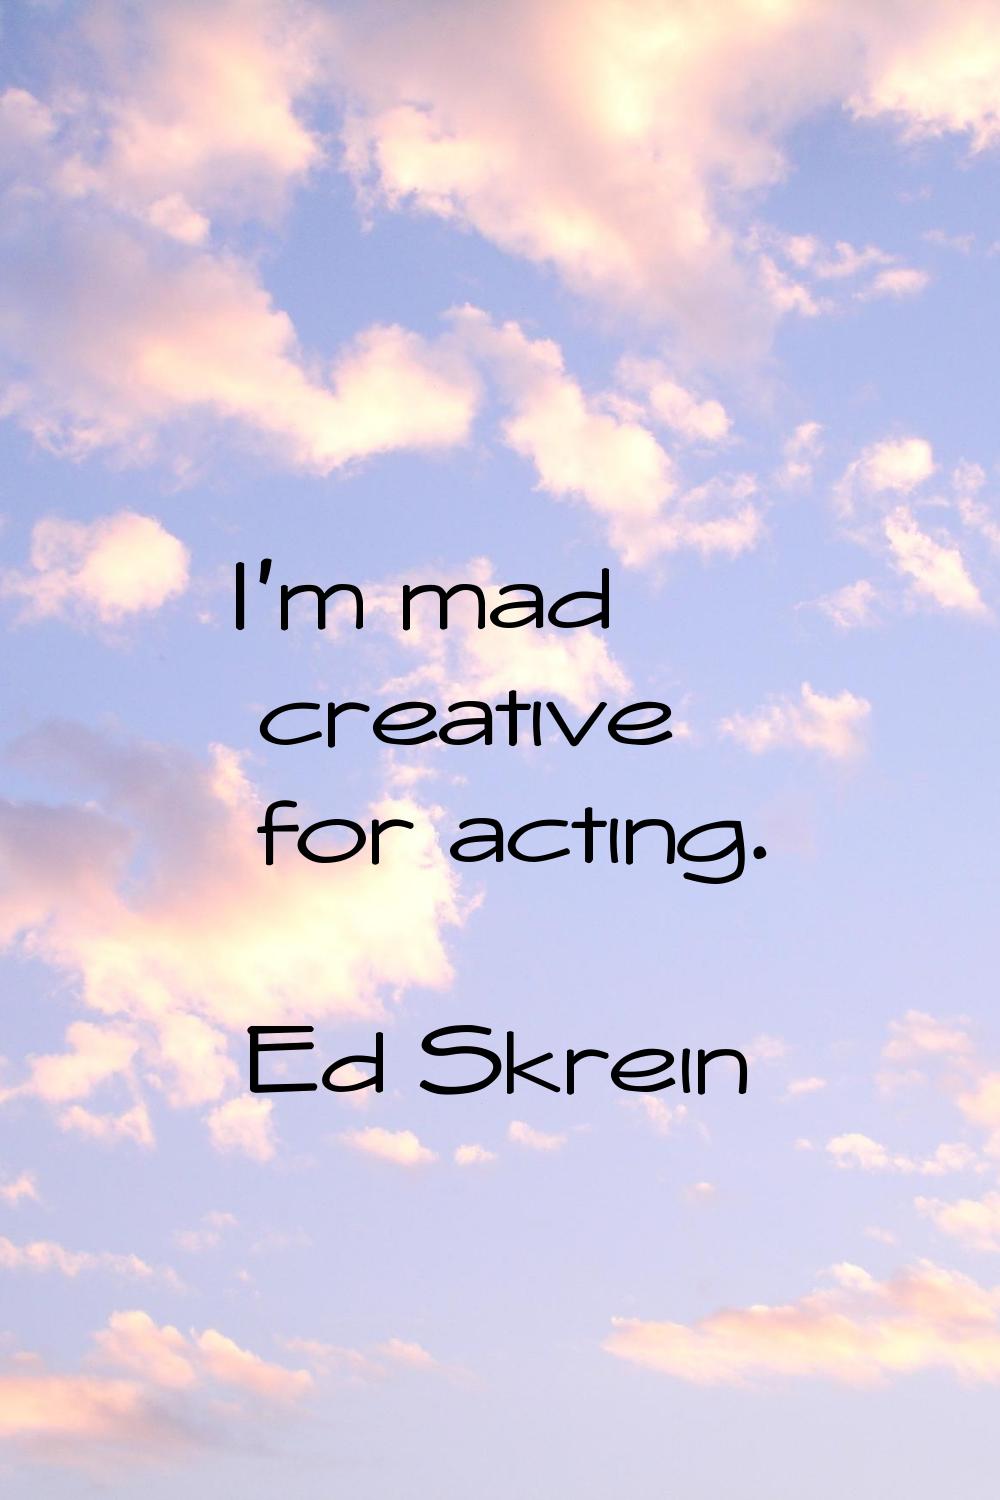 I'm mad creative for acting.